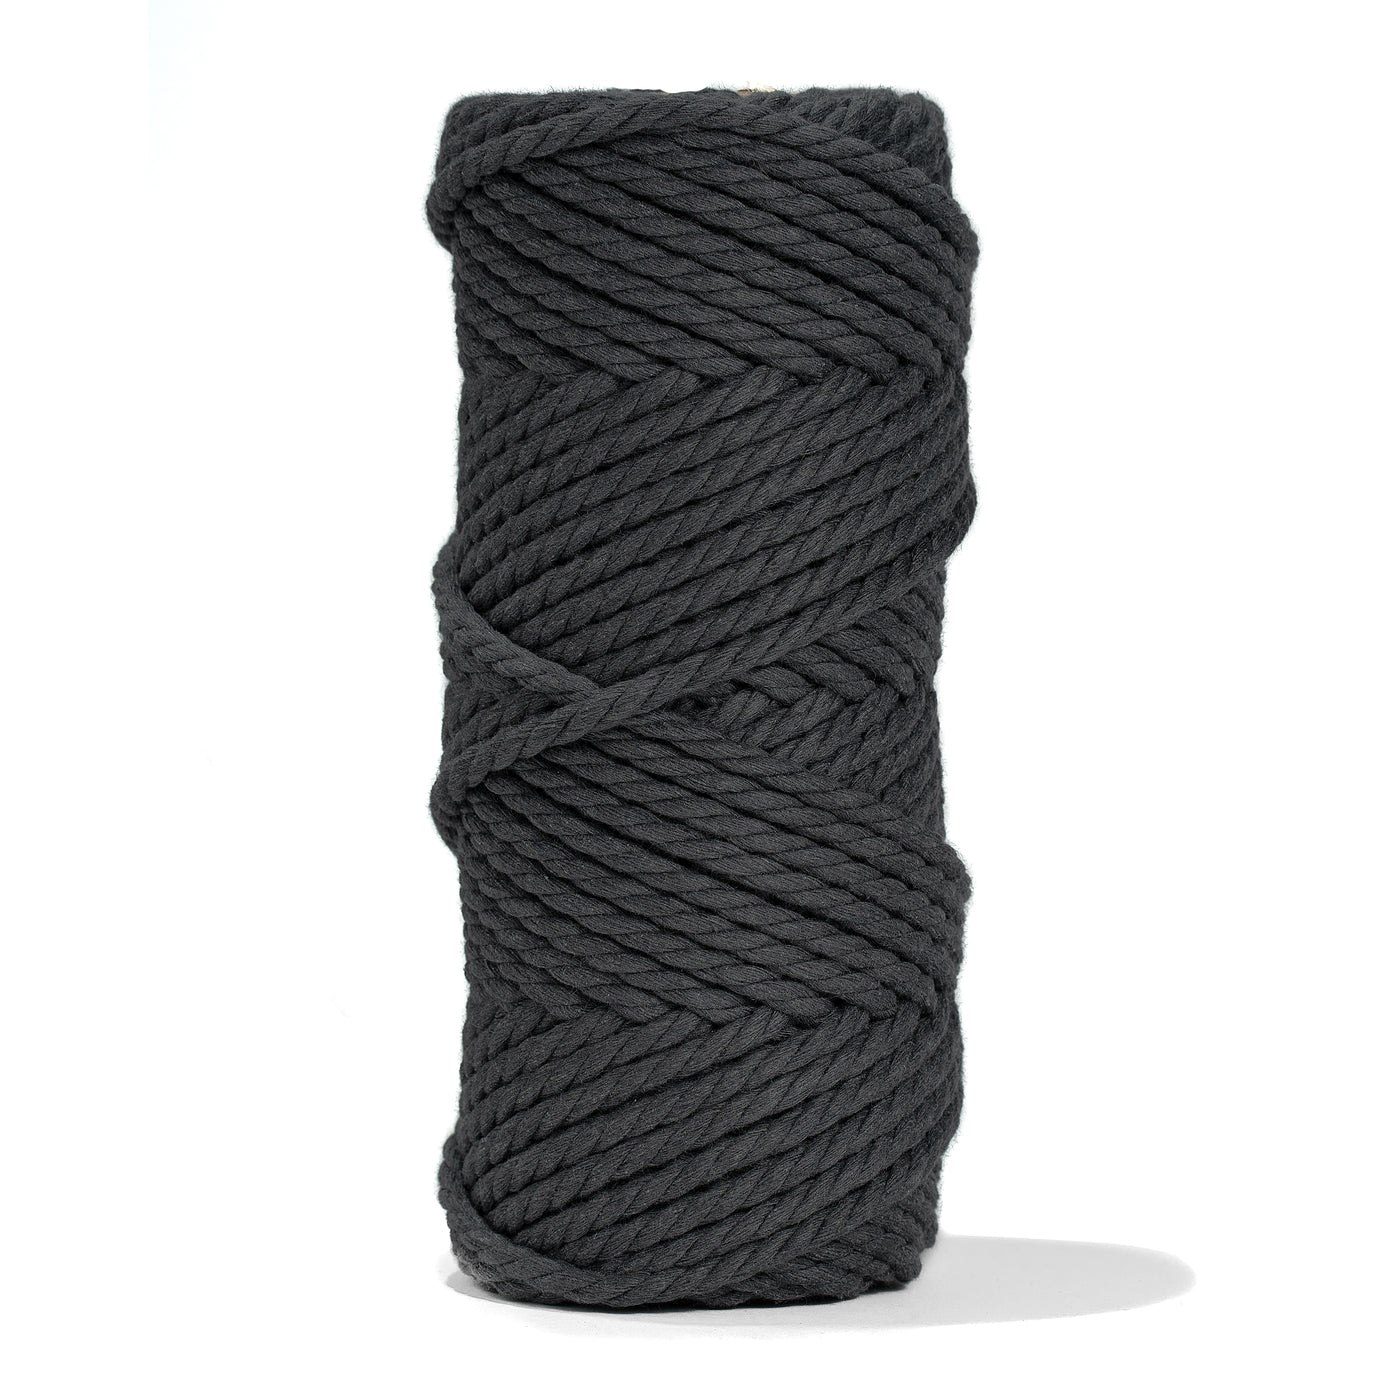 COTTON ROPE ZERO WASTE 5 MM - 3 PLY - ANTHRACITE GRAY COLOR